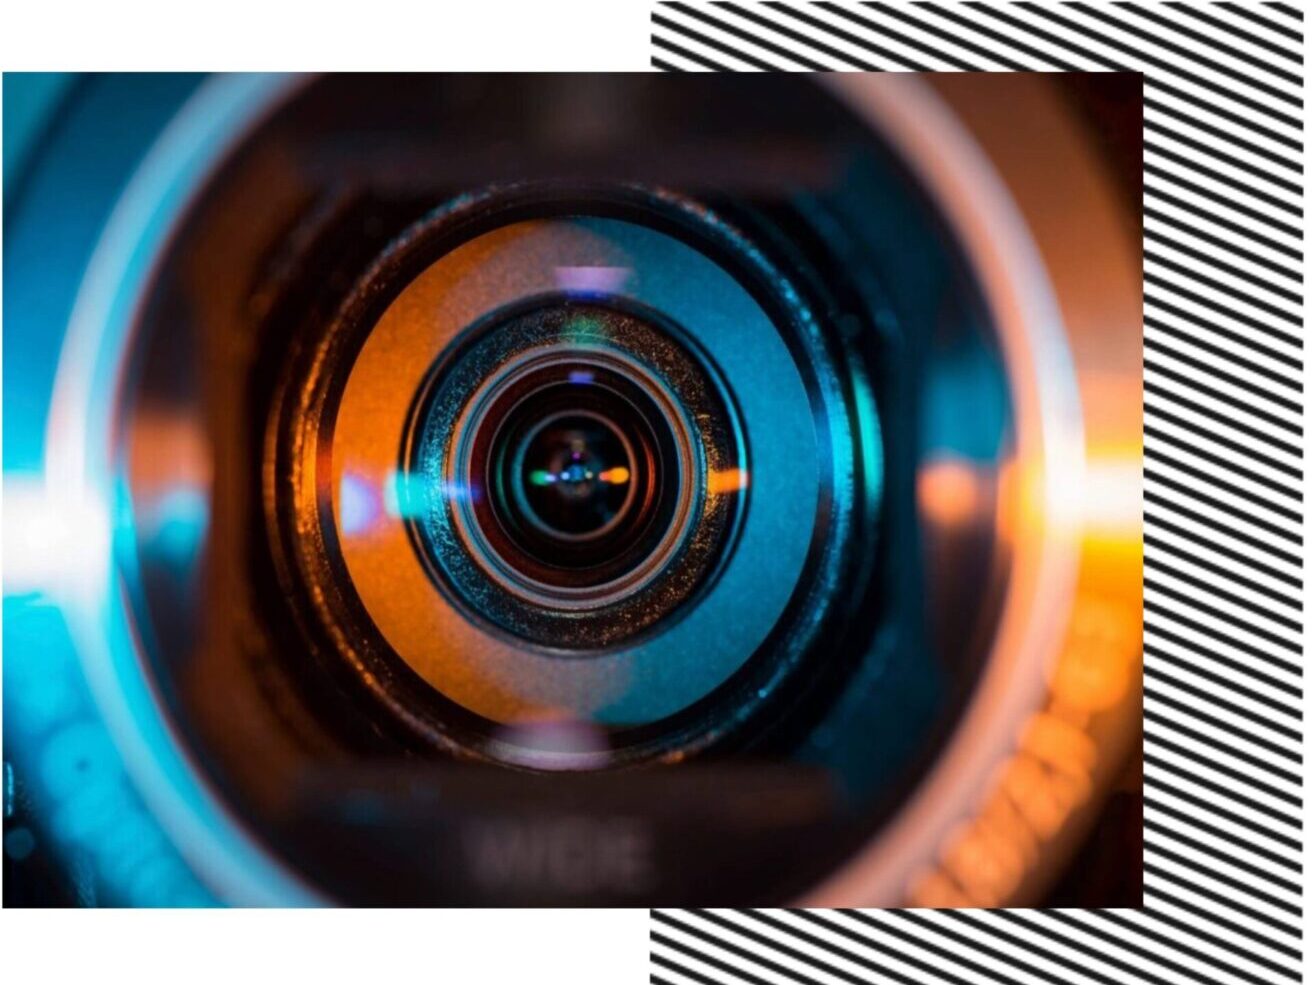 A close up of the camera lens with an orange and blue reflection.